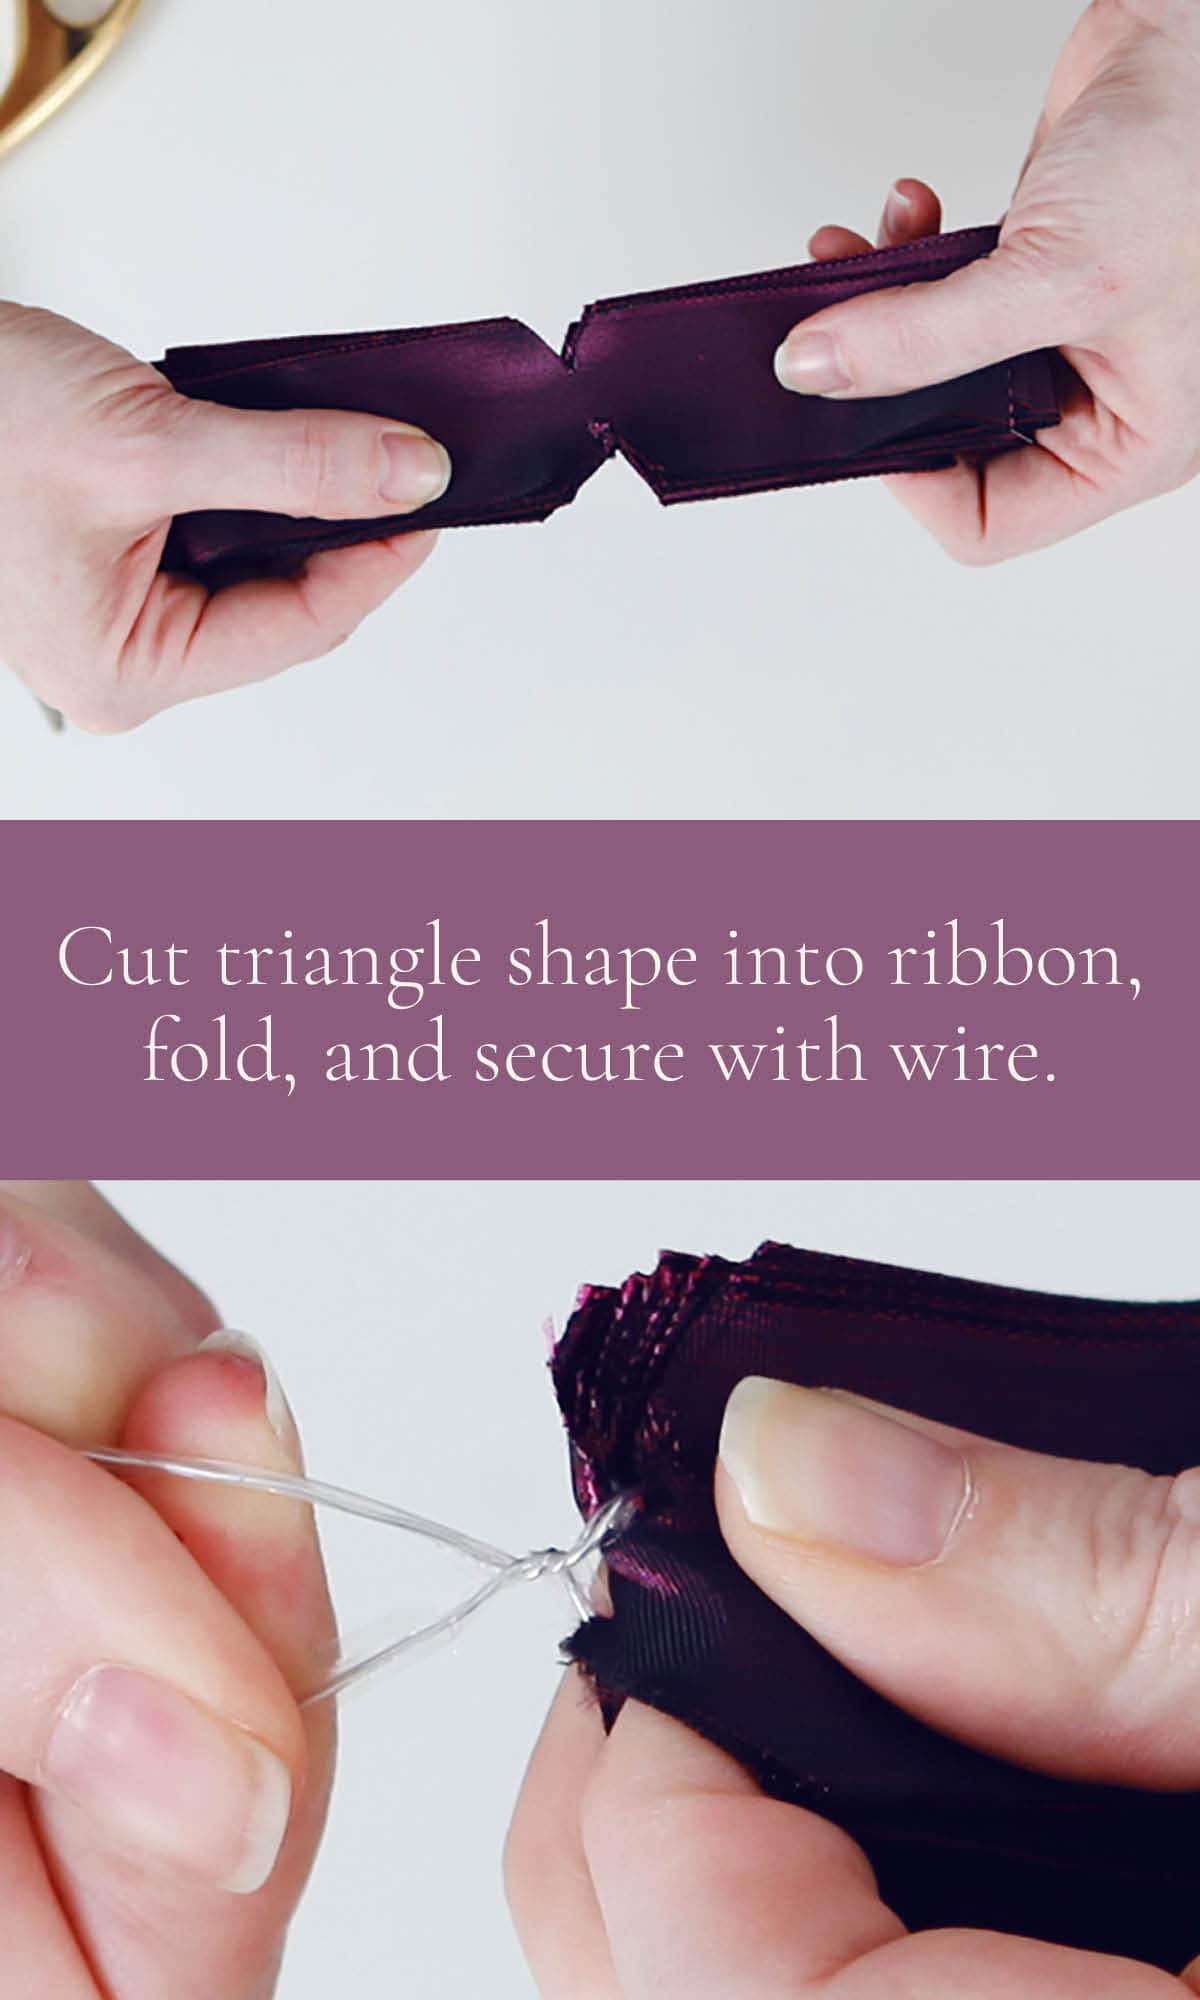 Super Easy Bow Making Tutorial - Learn how to make a super easy gift bow using wire ribbon and wrap presents like a professional in 10 simple steps.